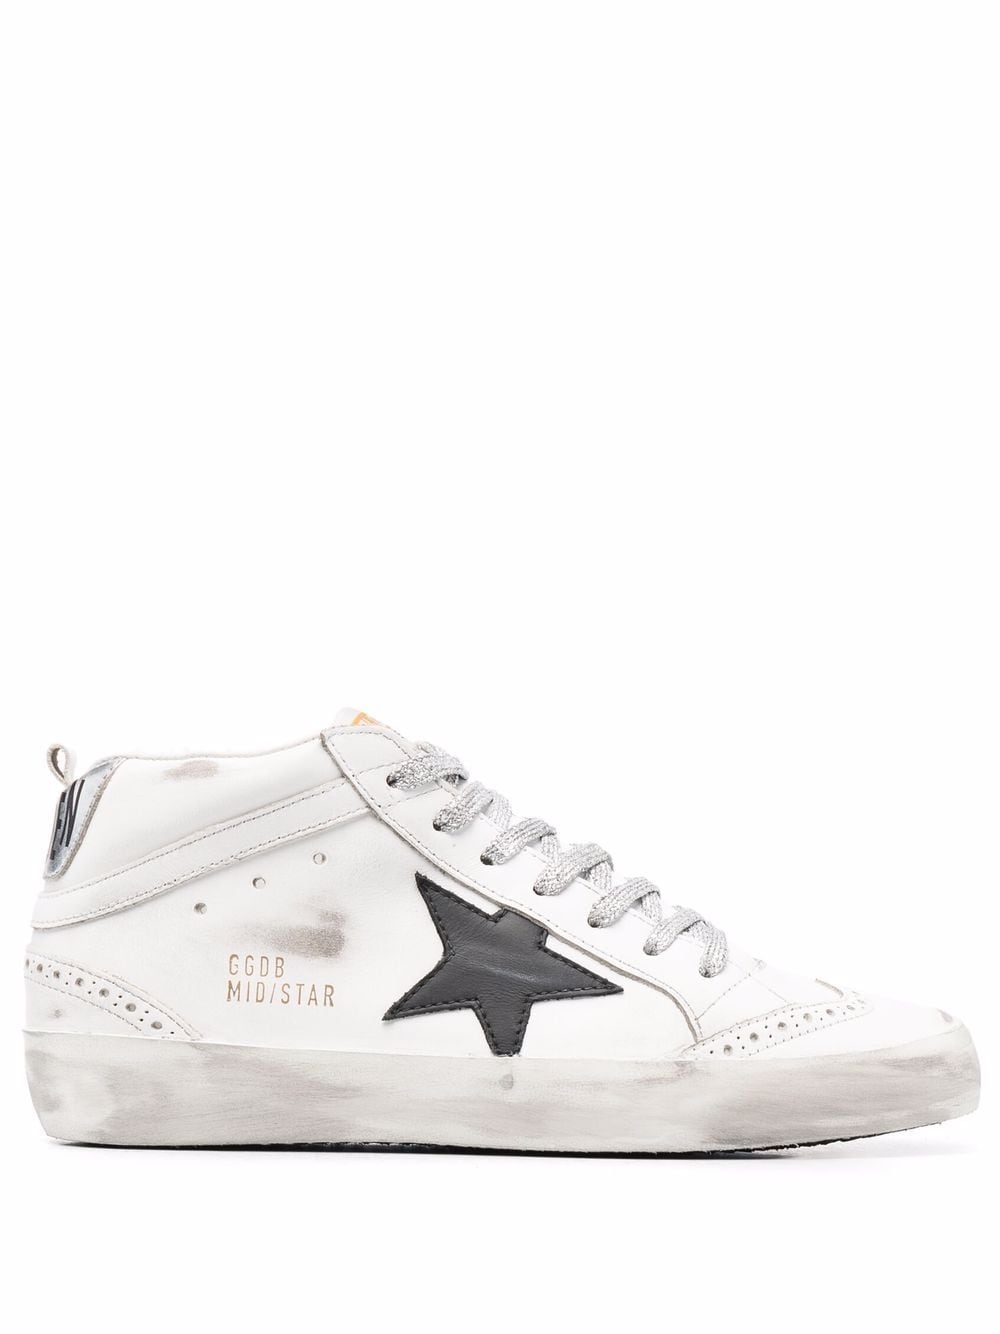 Mid-Star high-top sneakers